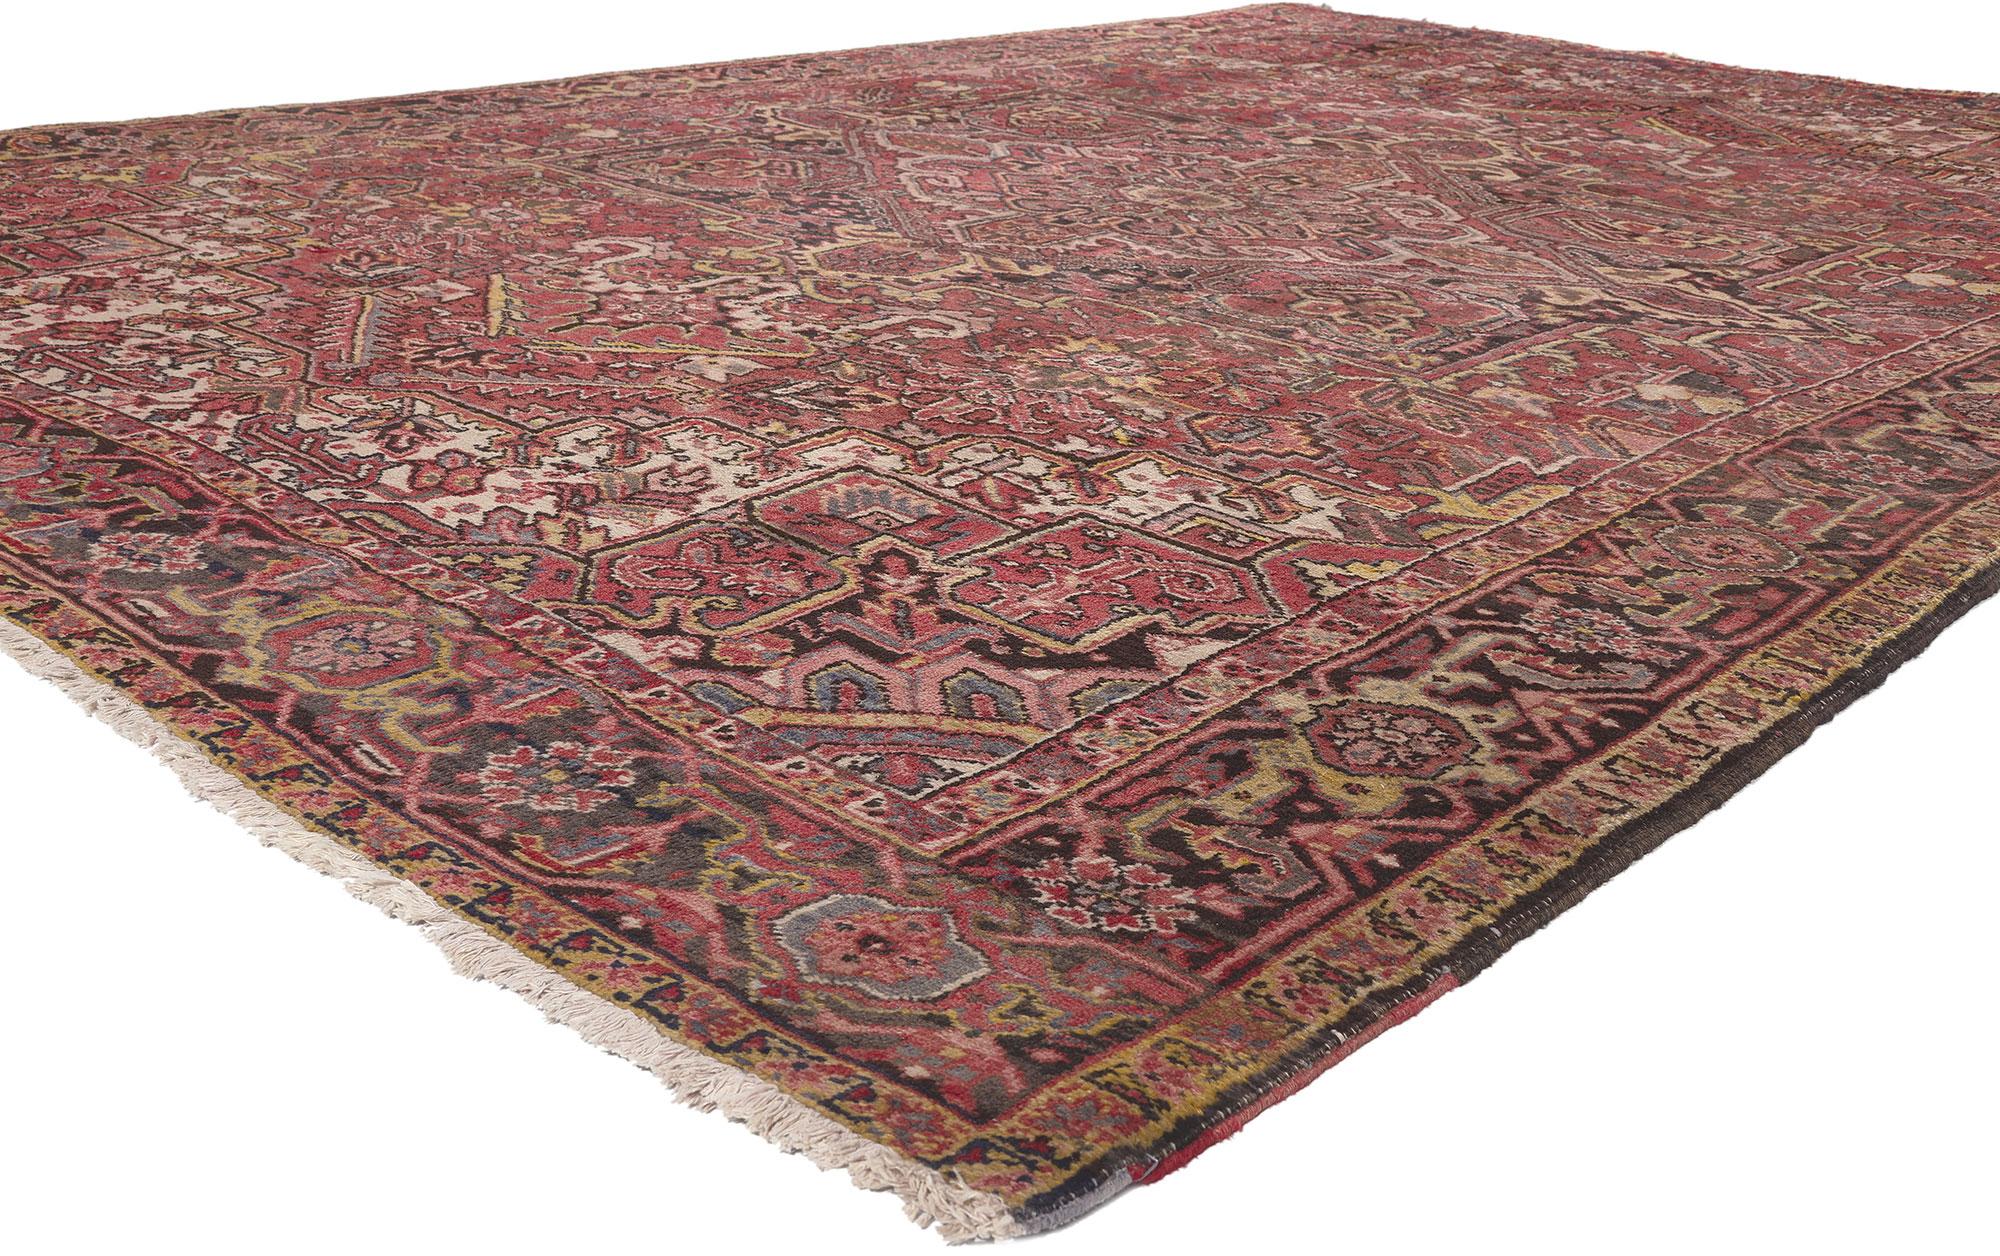 76588 Vintage Persian Heriz Rug, 08'04 x 11'08.
Laid-back luxury meets traditional sensibility in this vintage Persian Heriz rug. The stylish levels of complexity and traditional color palette woven into this piece work together creating a warm and